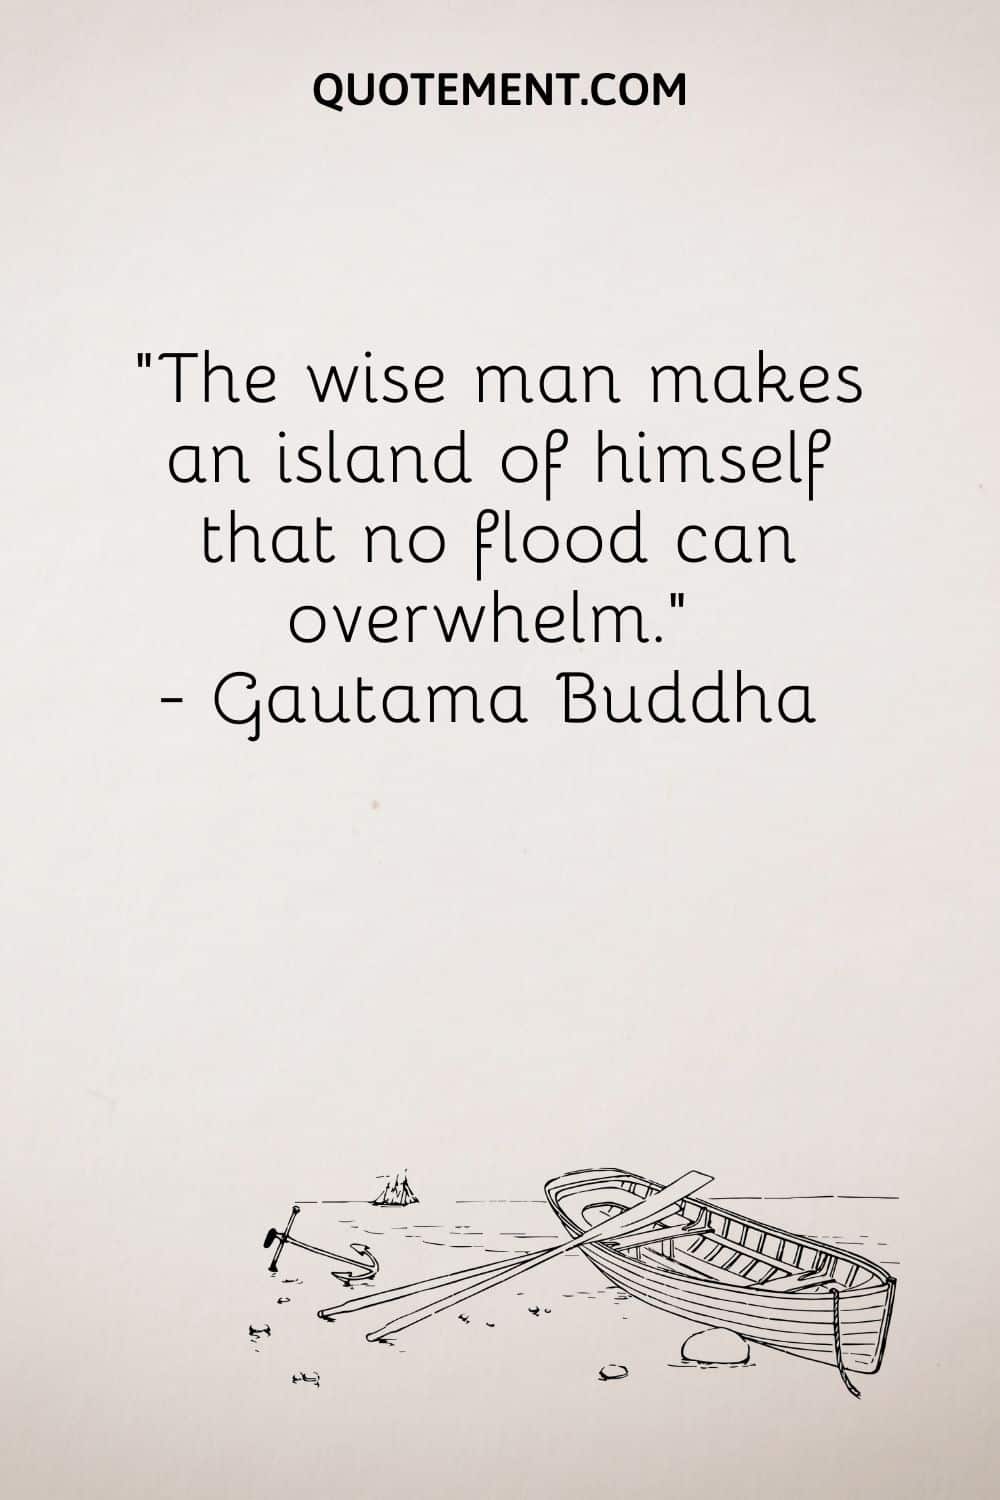 The wise man makes an island of himself that no flood can overwhelm. — Gautama Buddha